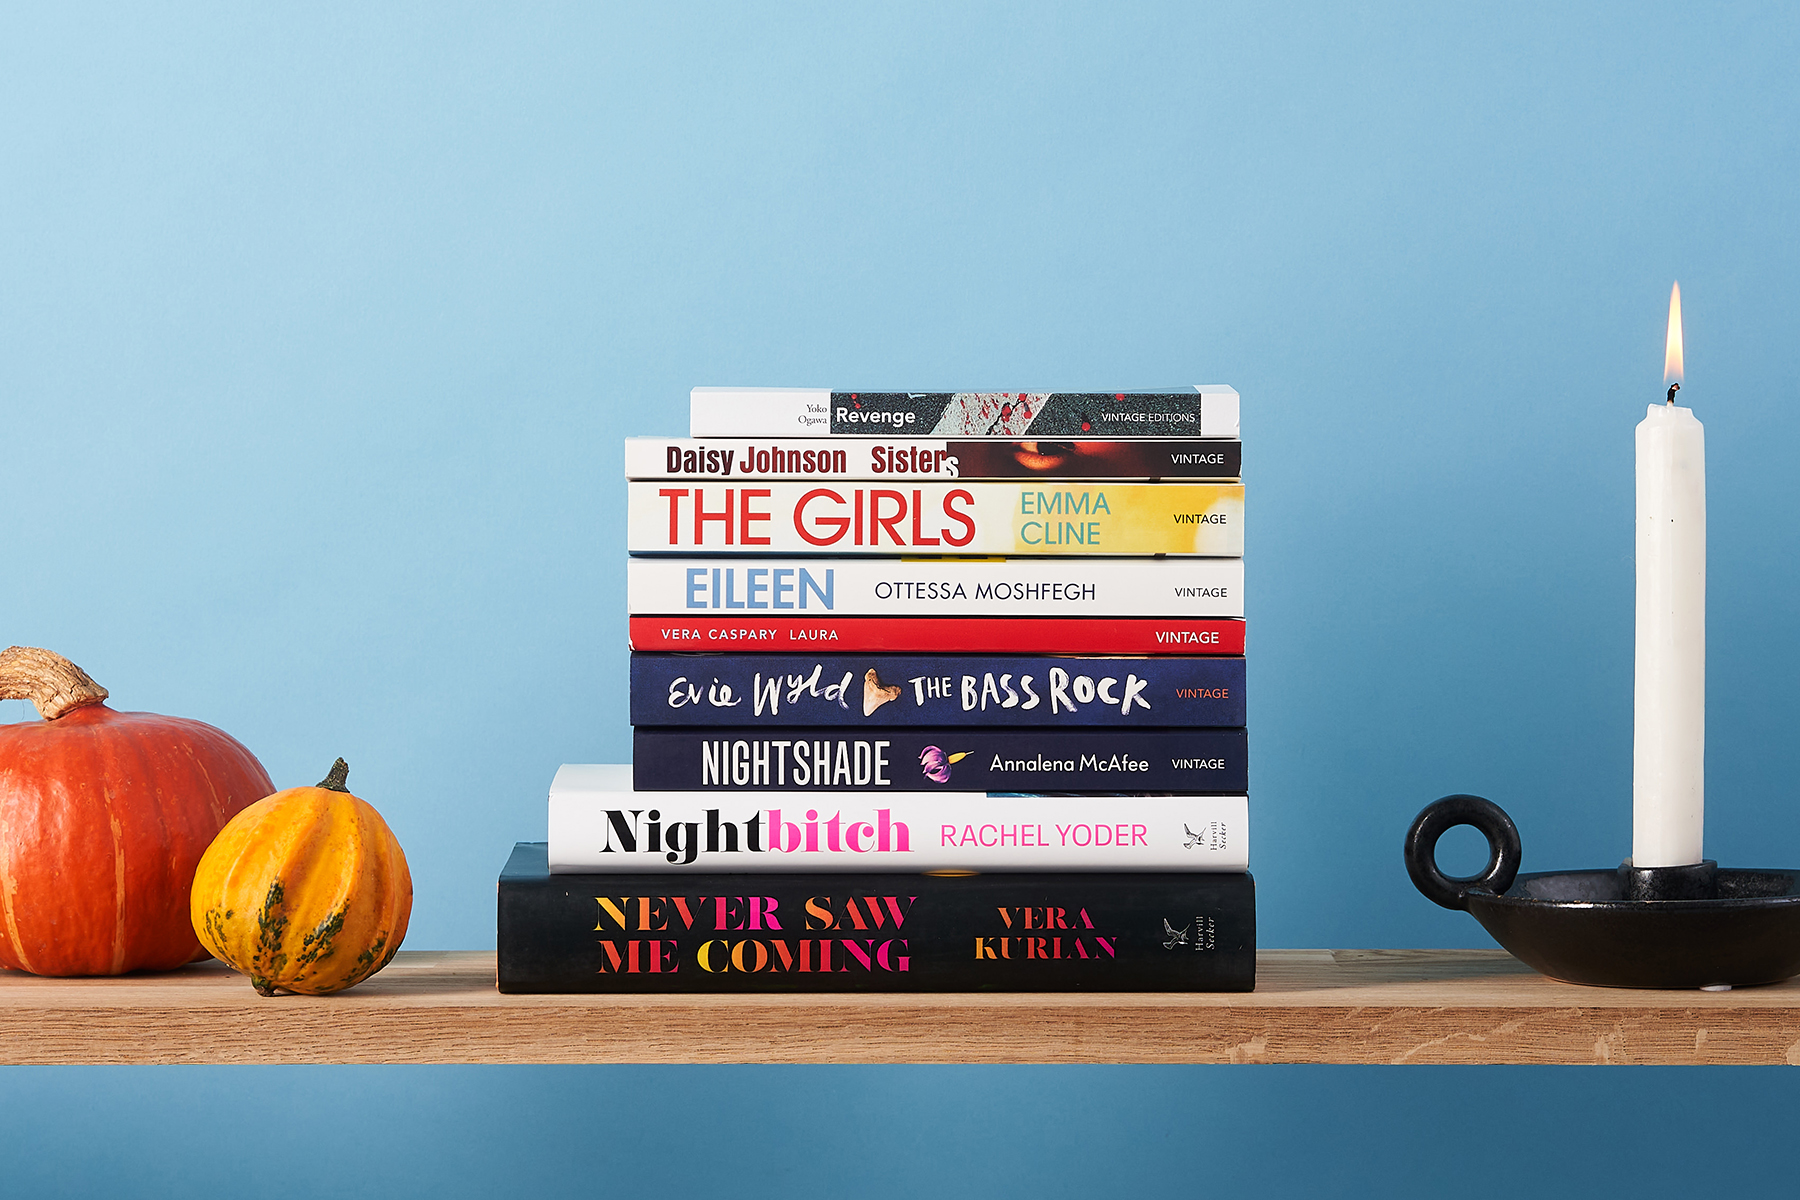 Stack of 9 books on a wooden shelf against a blue background, surrounded by gourds and a white candle.